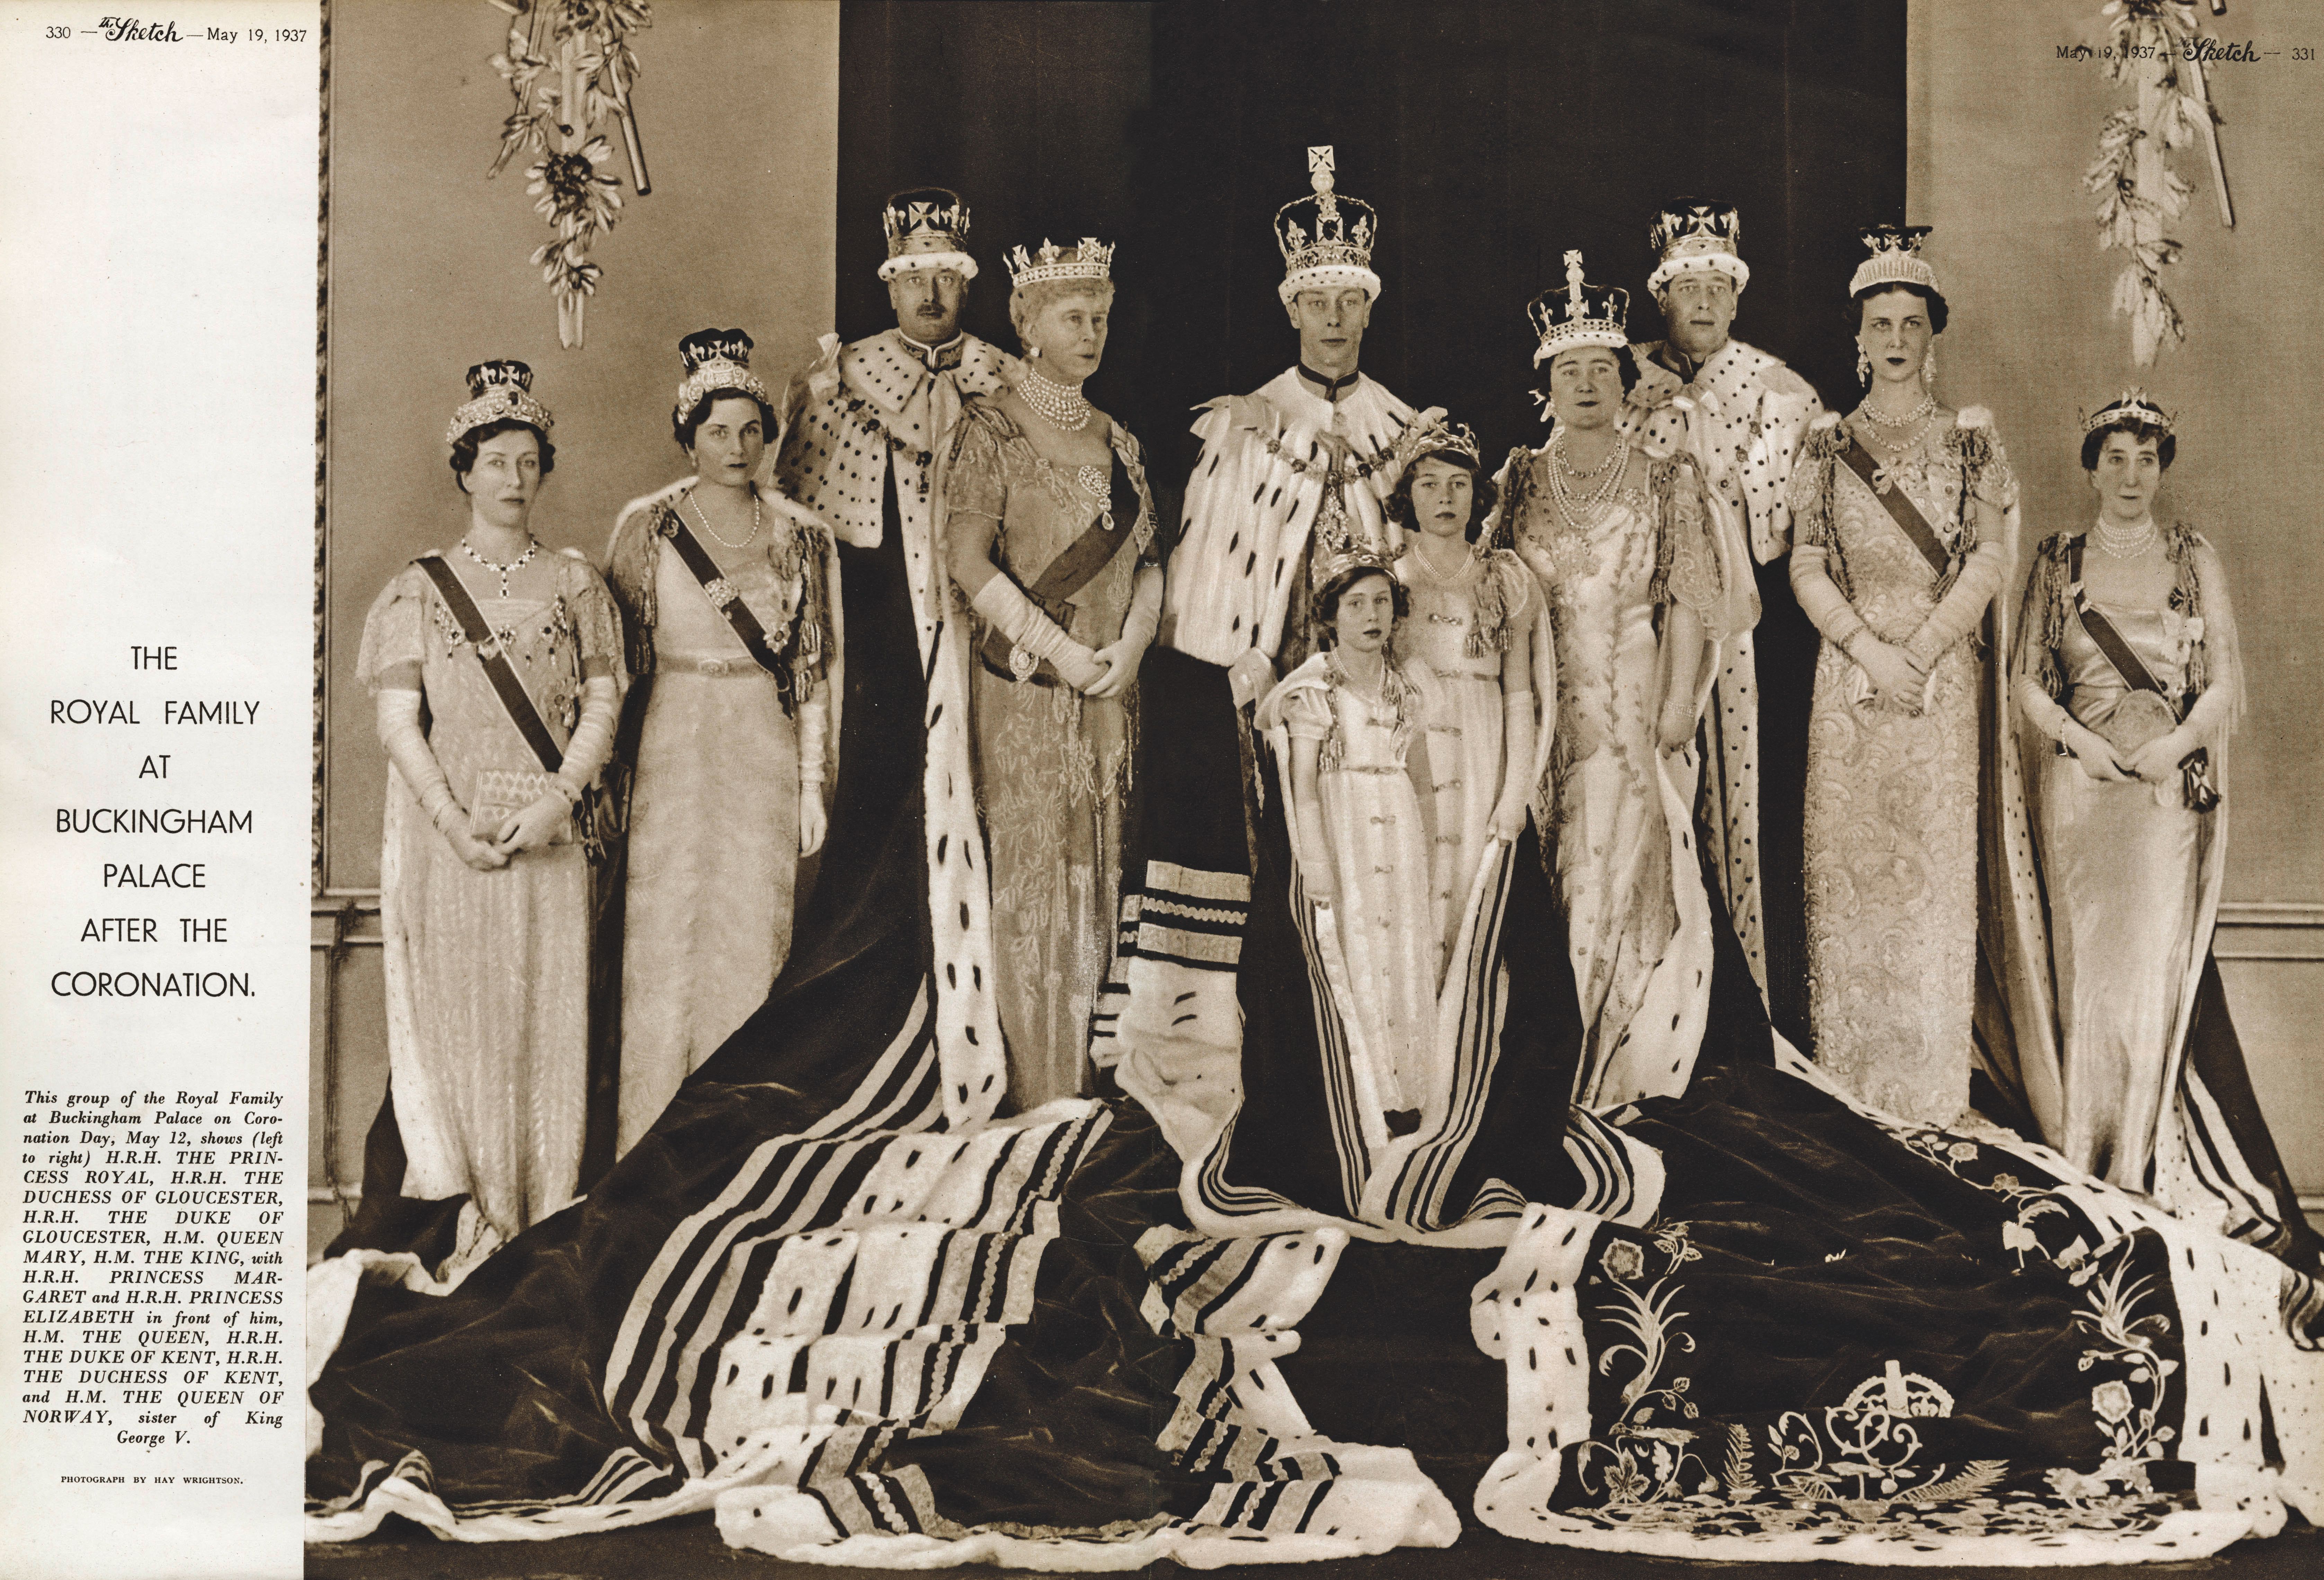 The Royal Family at Buckingham Palace after the Coronation of King George VI